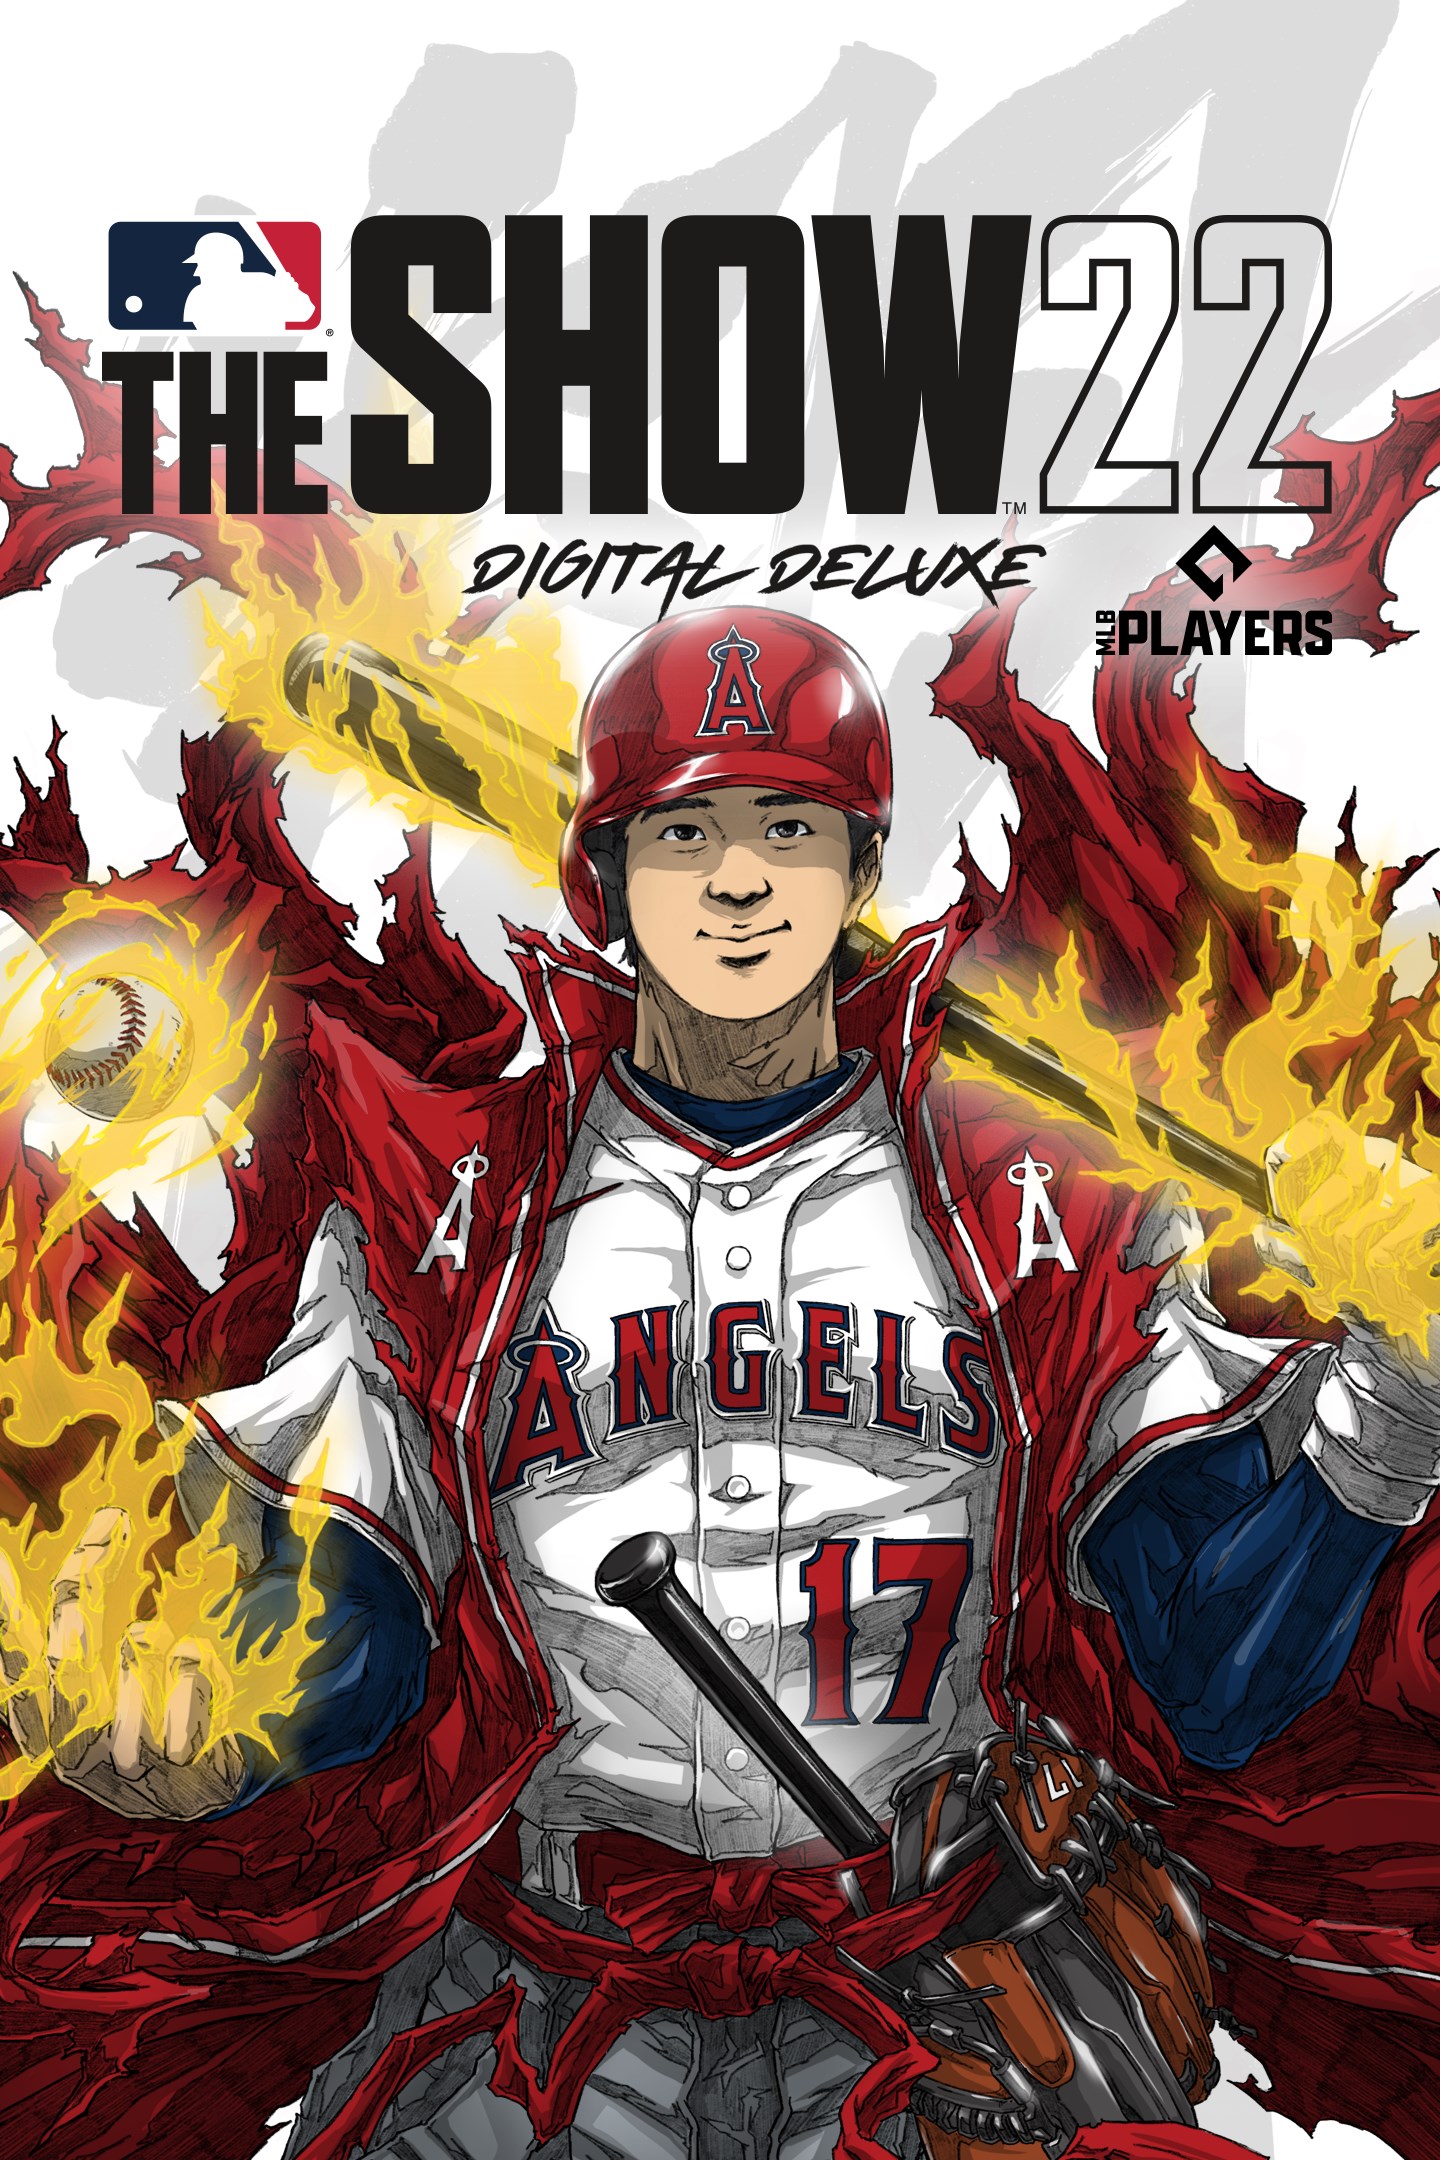 MLB® The Show™ 22 Édition Digitale Deluxe - Xbox One et Xbox Series X|S boxshot